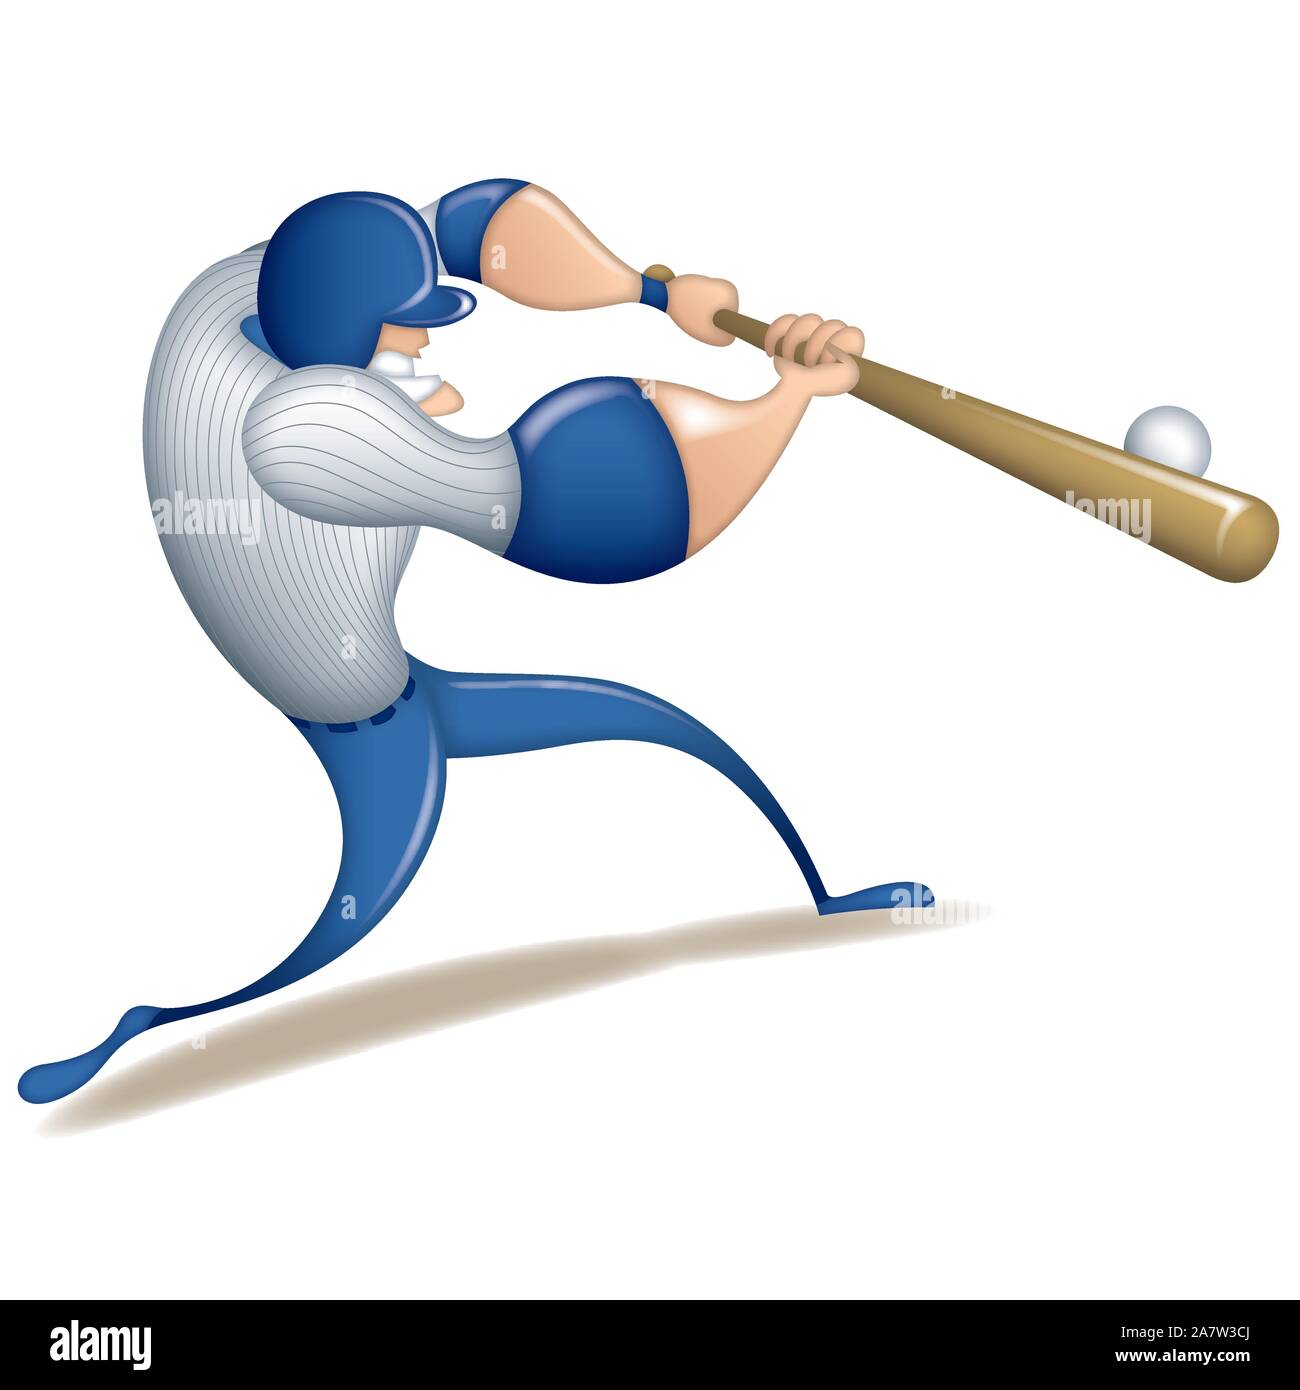 Baseball cartoon character player in action on white background